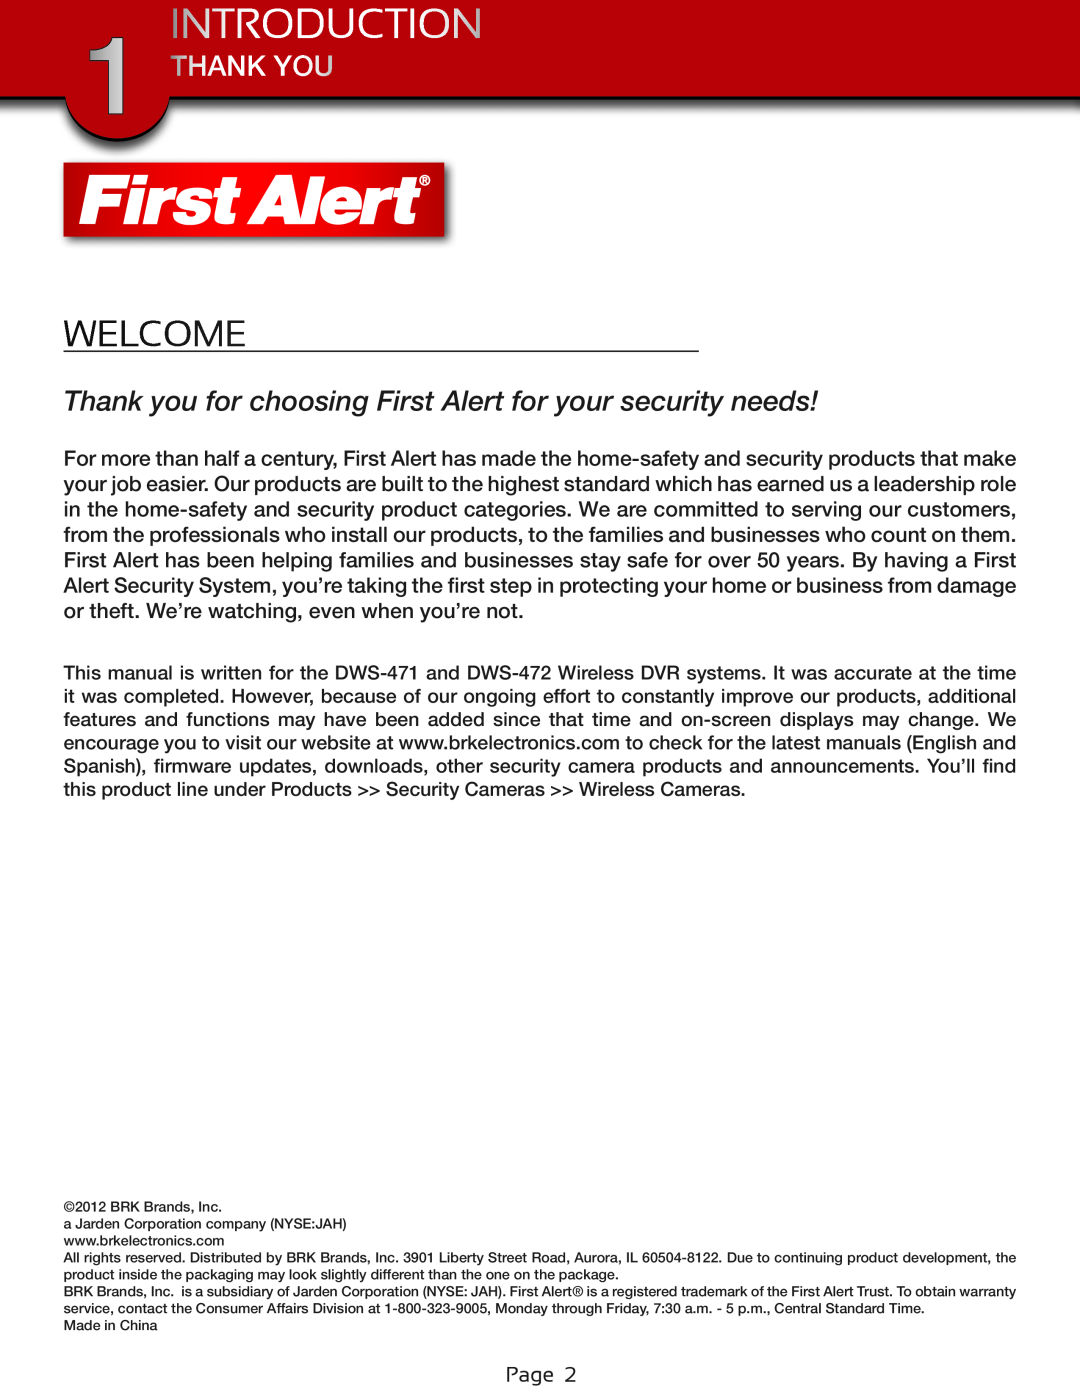 First Alert DWS-472, DWS-471 user manual Introduction, Welcome, Thank You 